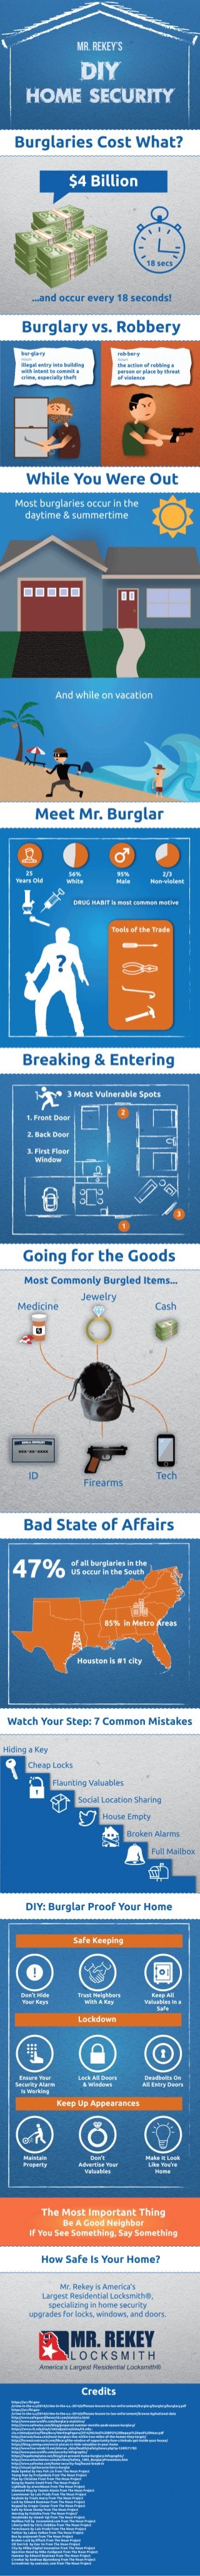 DIY Home Security Tips & Tricks to Burglar-Proof Your Home